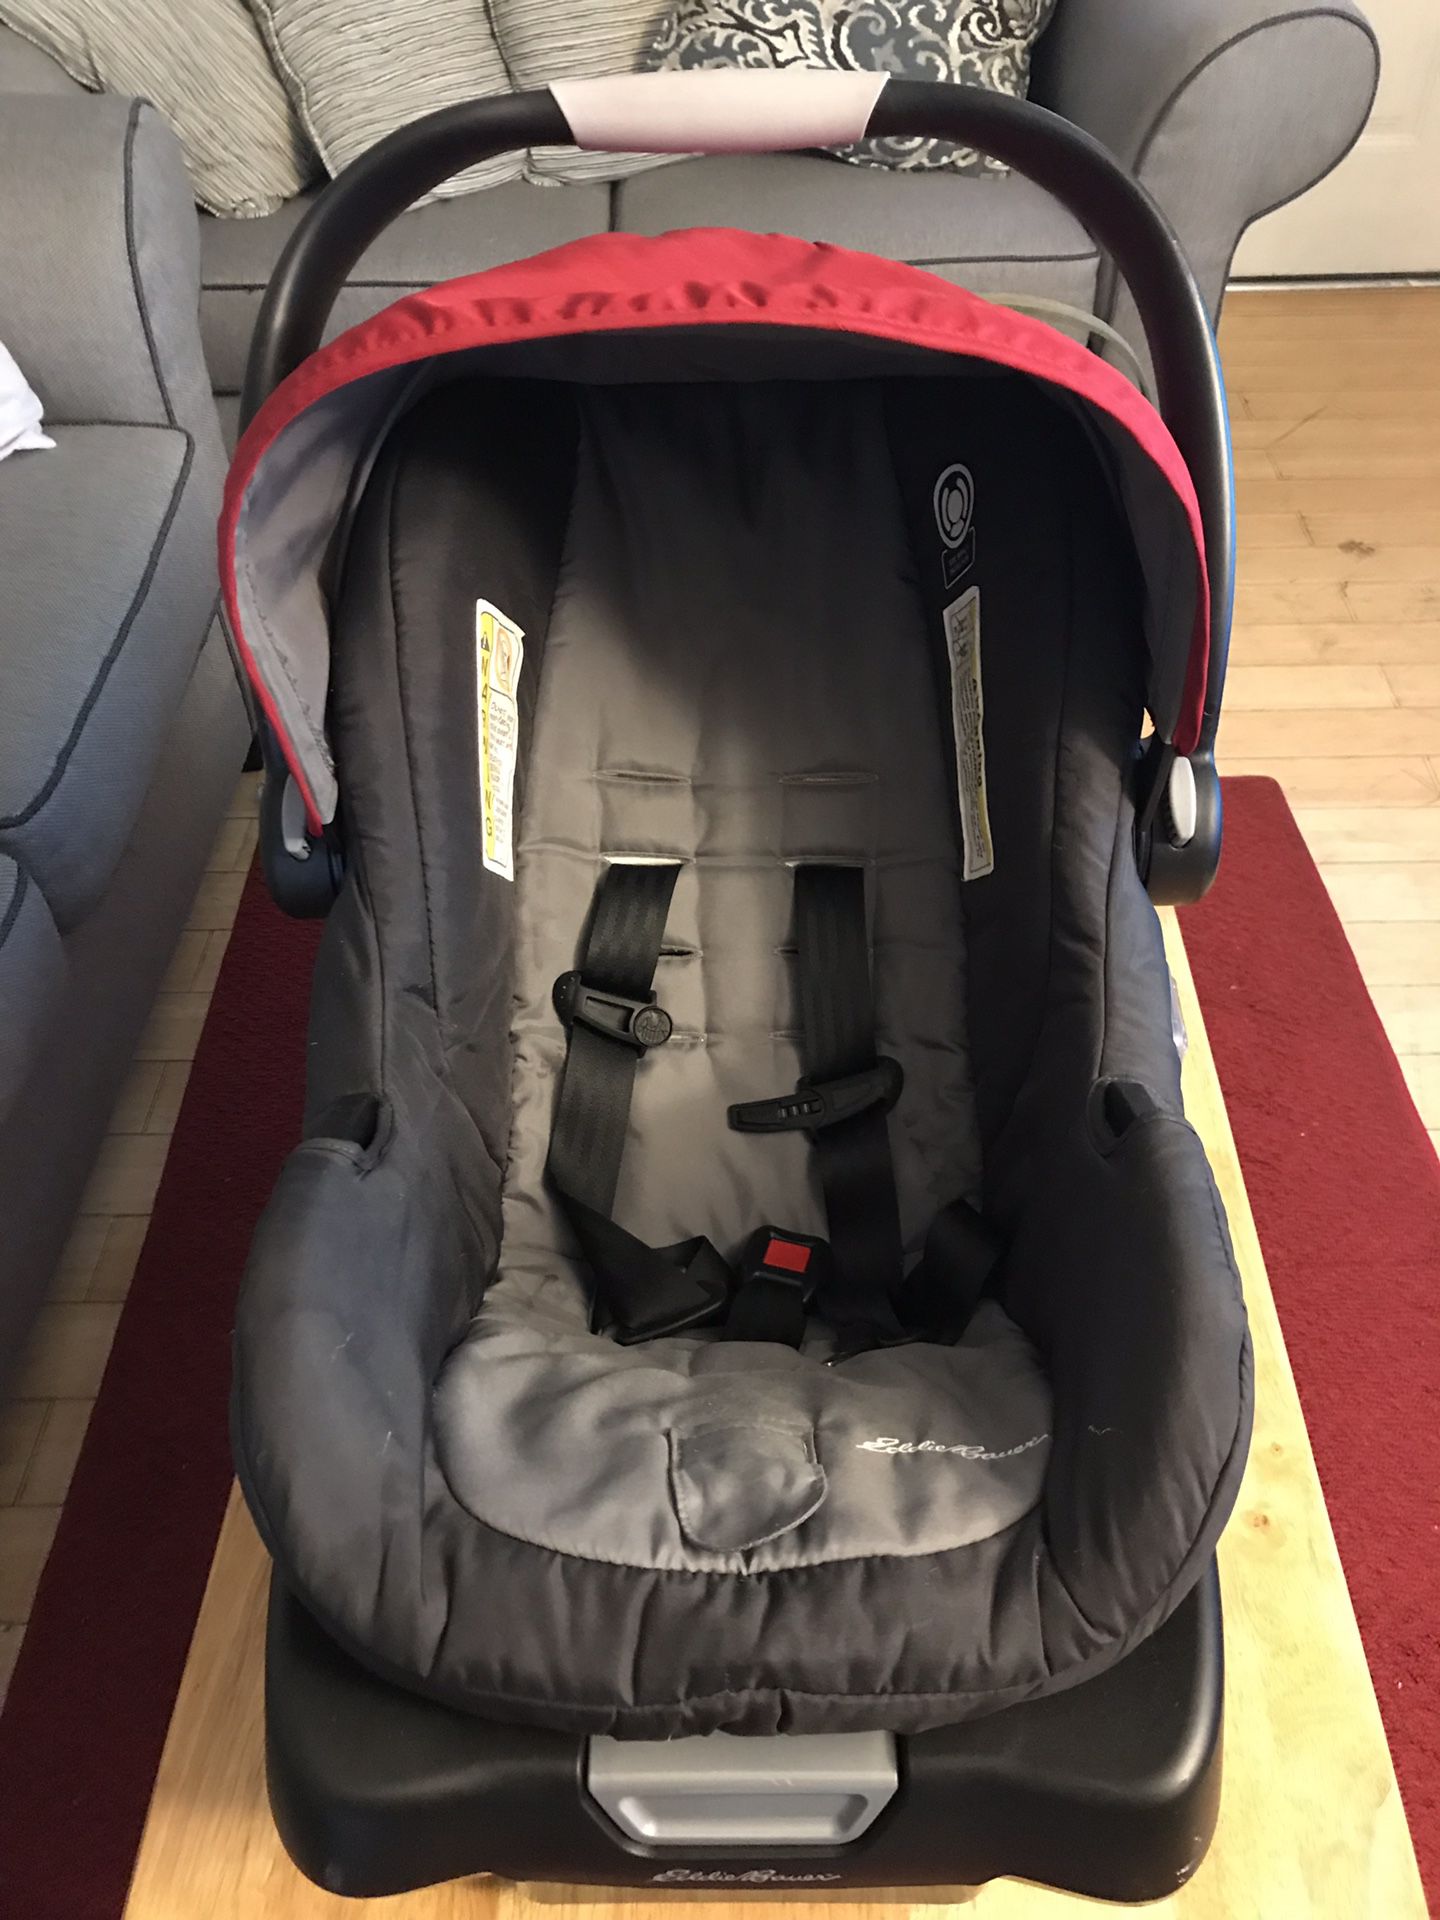 Used a couple times it’s an Eddie Bauer infant car seat .